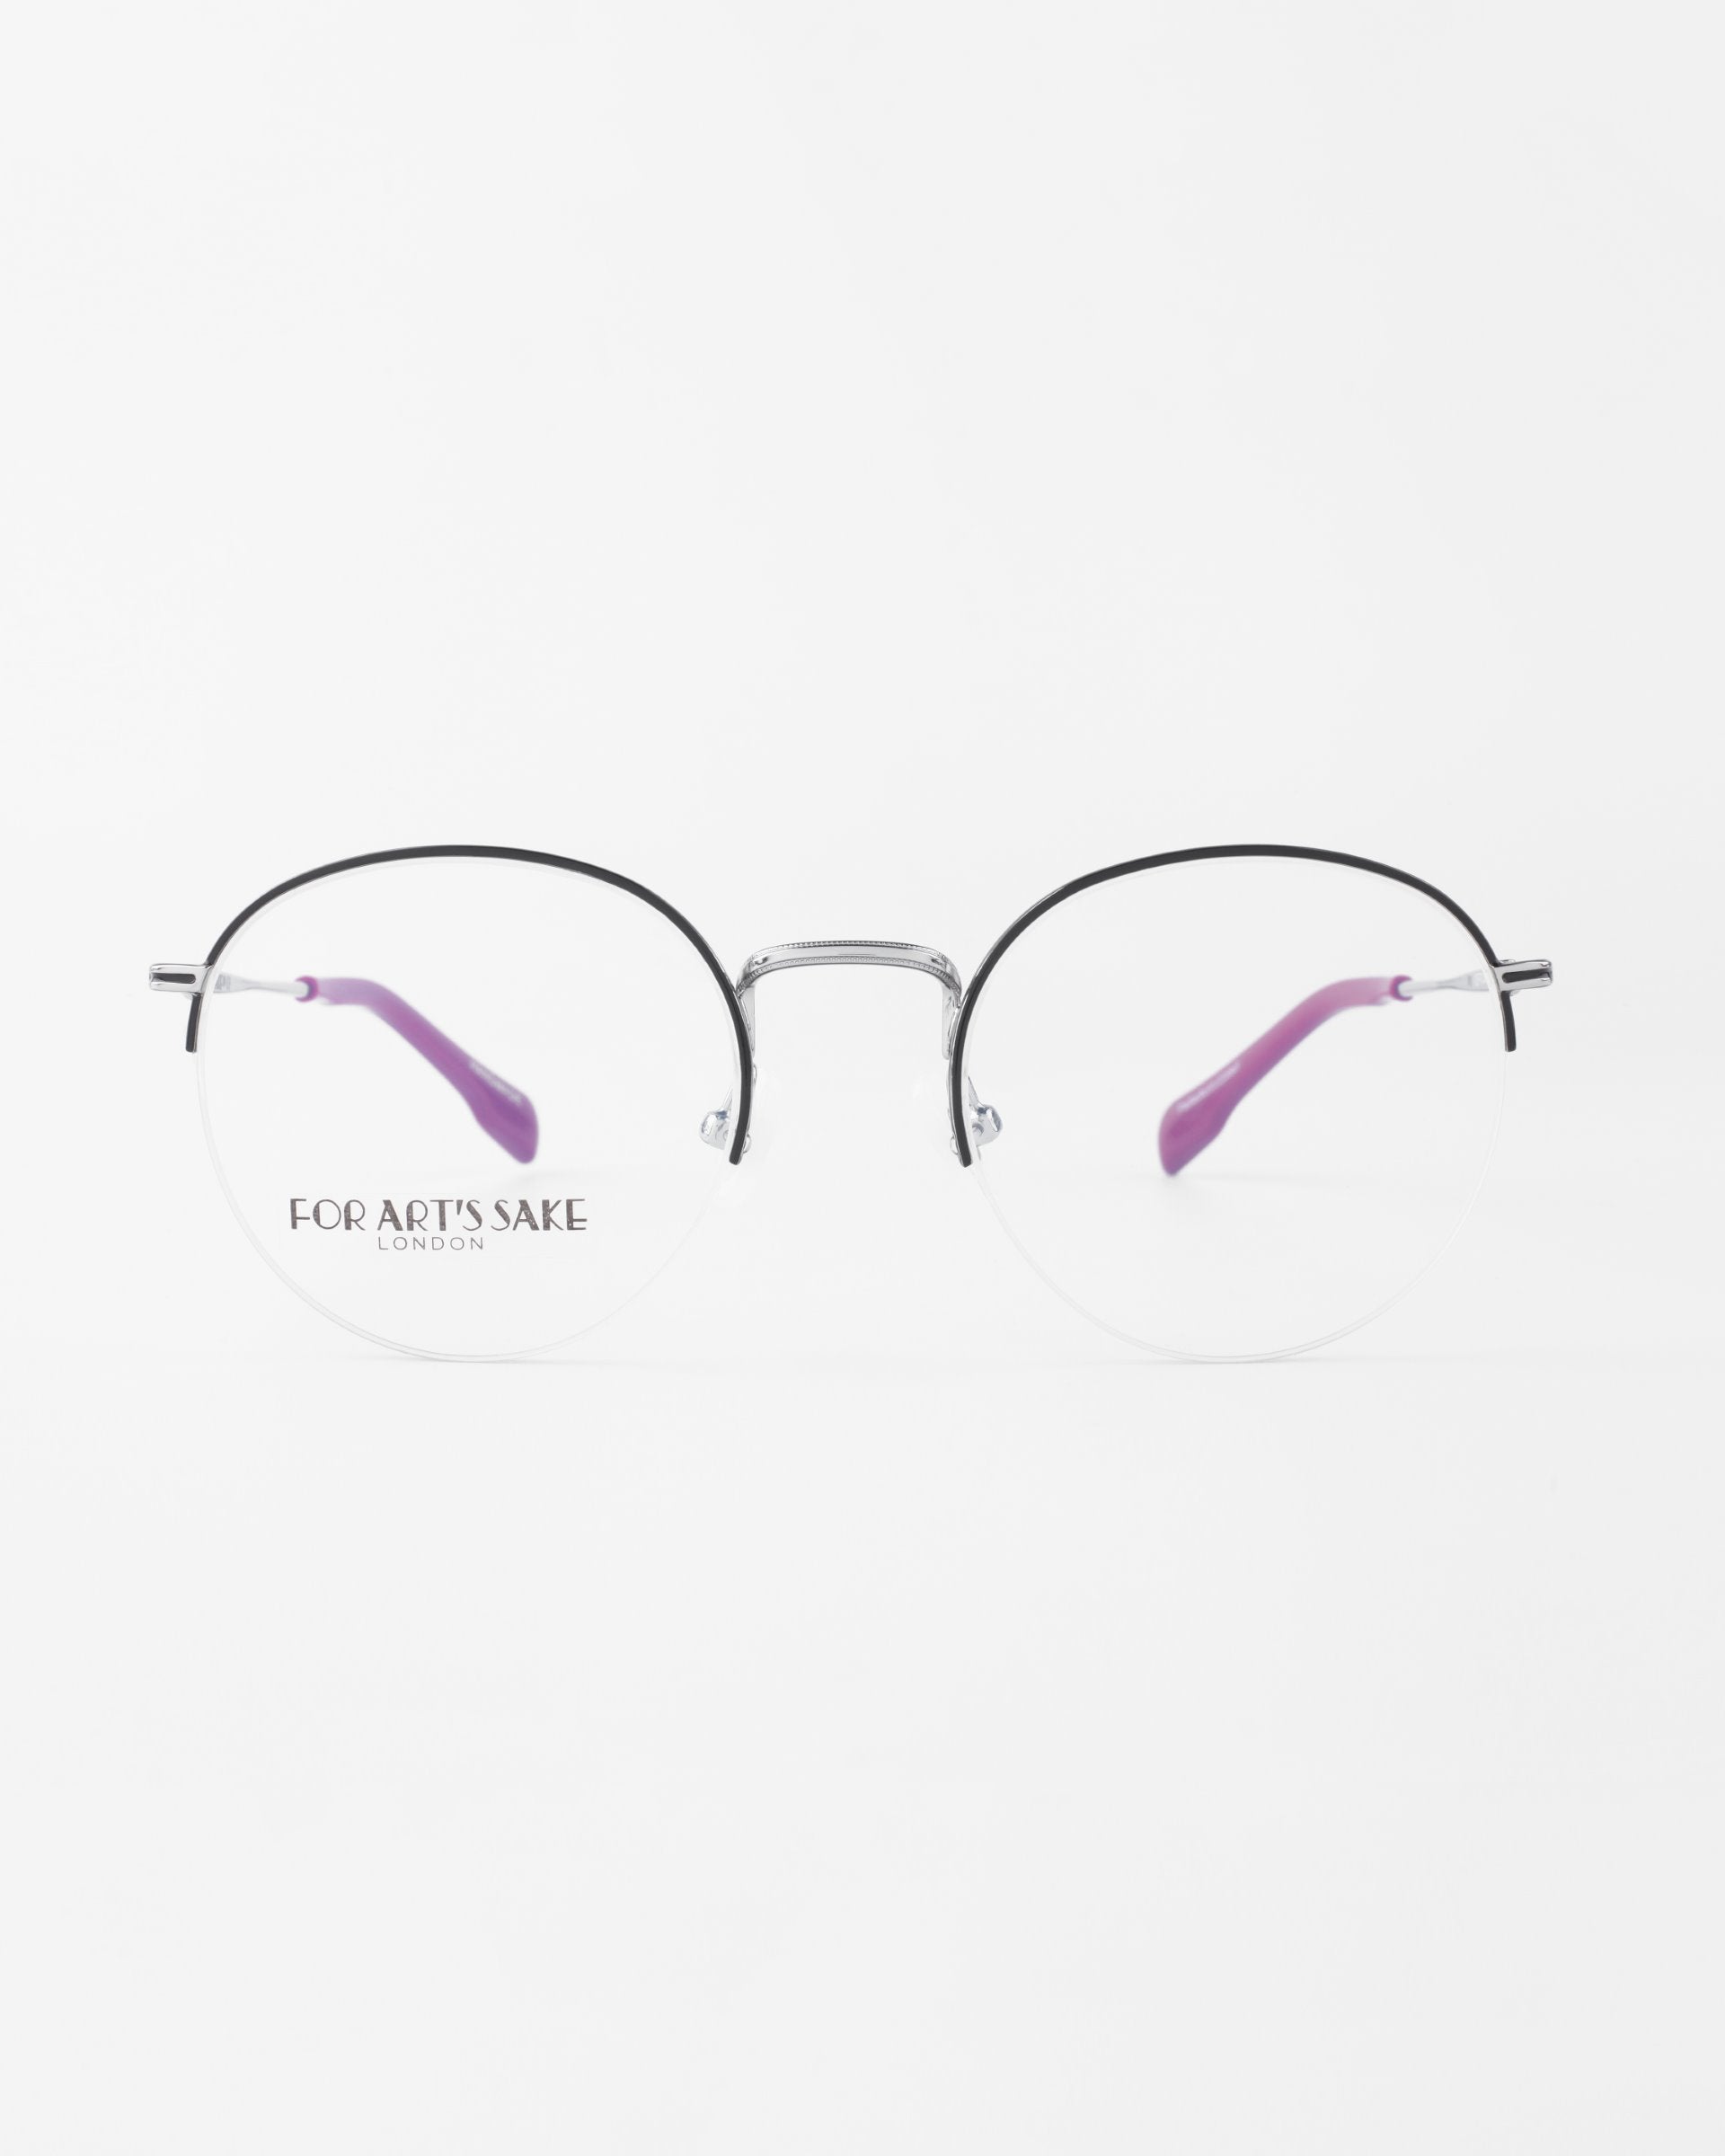 A pair of round, silver-framed glasses with purple, slightly curved earpieces. One lens has the text &quot;For Art&#39;s Sake®&quot; printed on it. Offering blue light filter technology, these stylish frames are perfect for the modern, tech-savvy individual. The background is plain white. The product name is Ivy from For Art&#39;s Sake®.